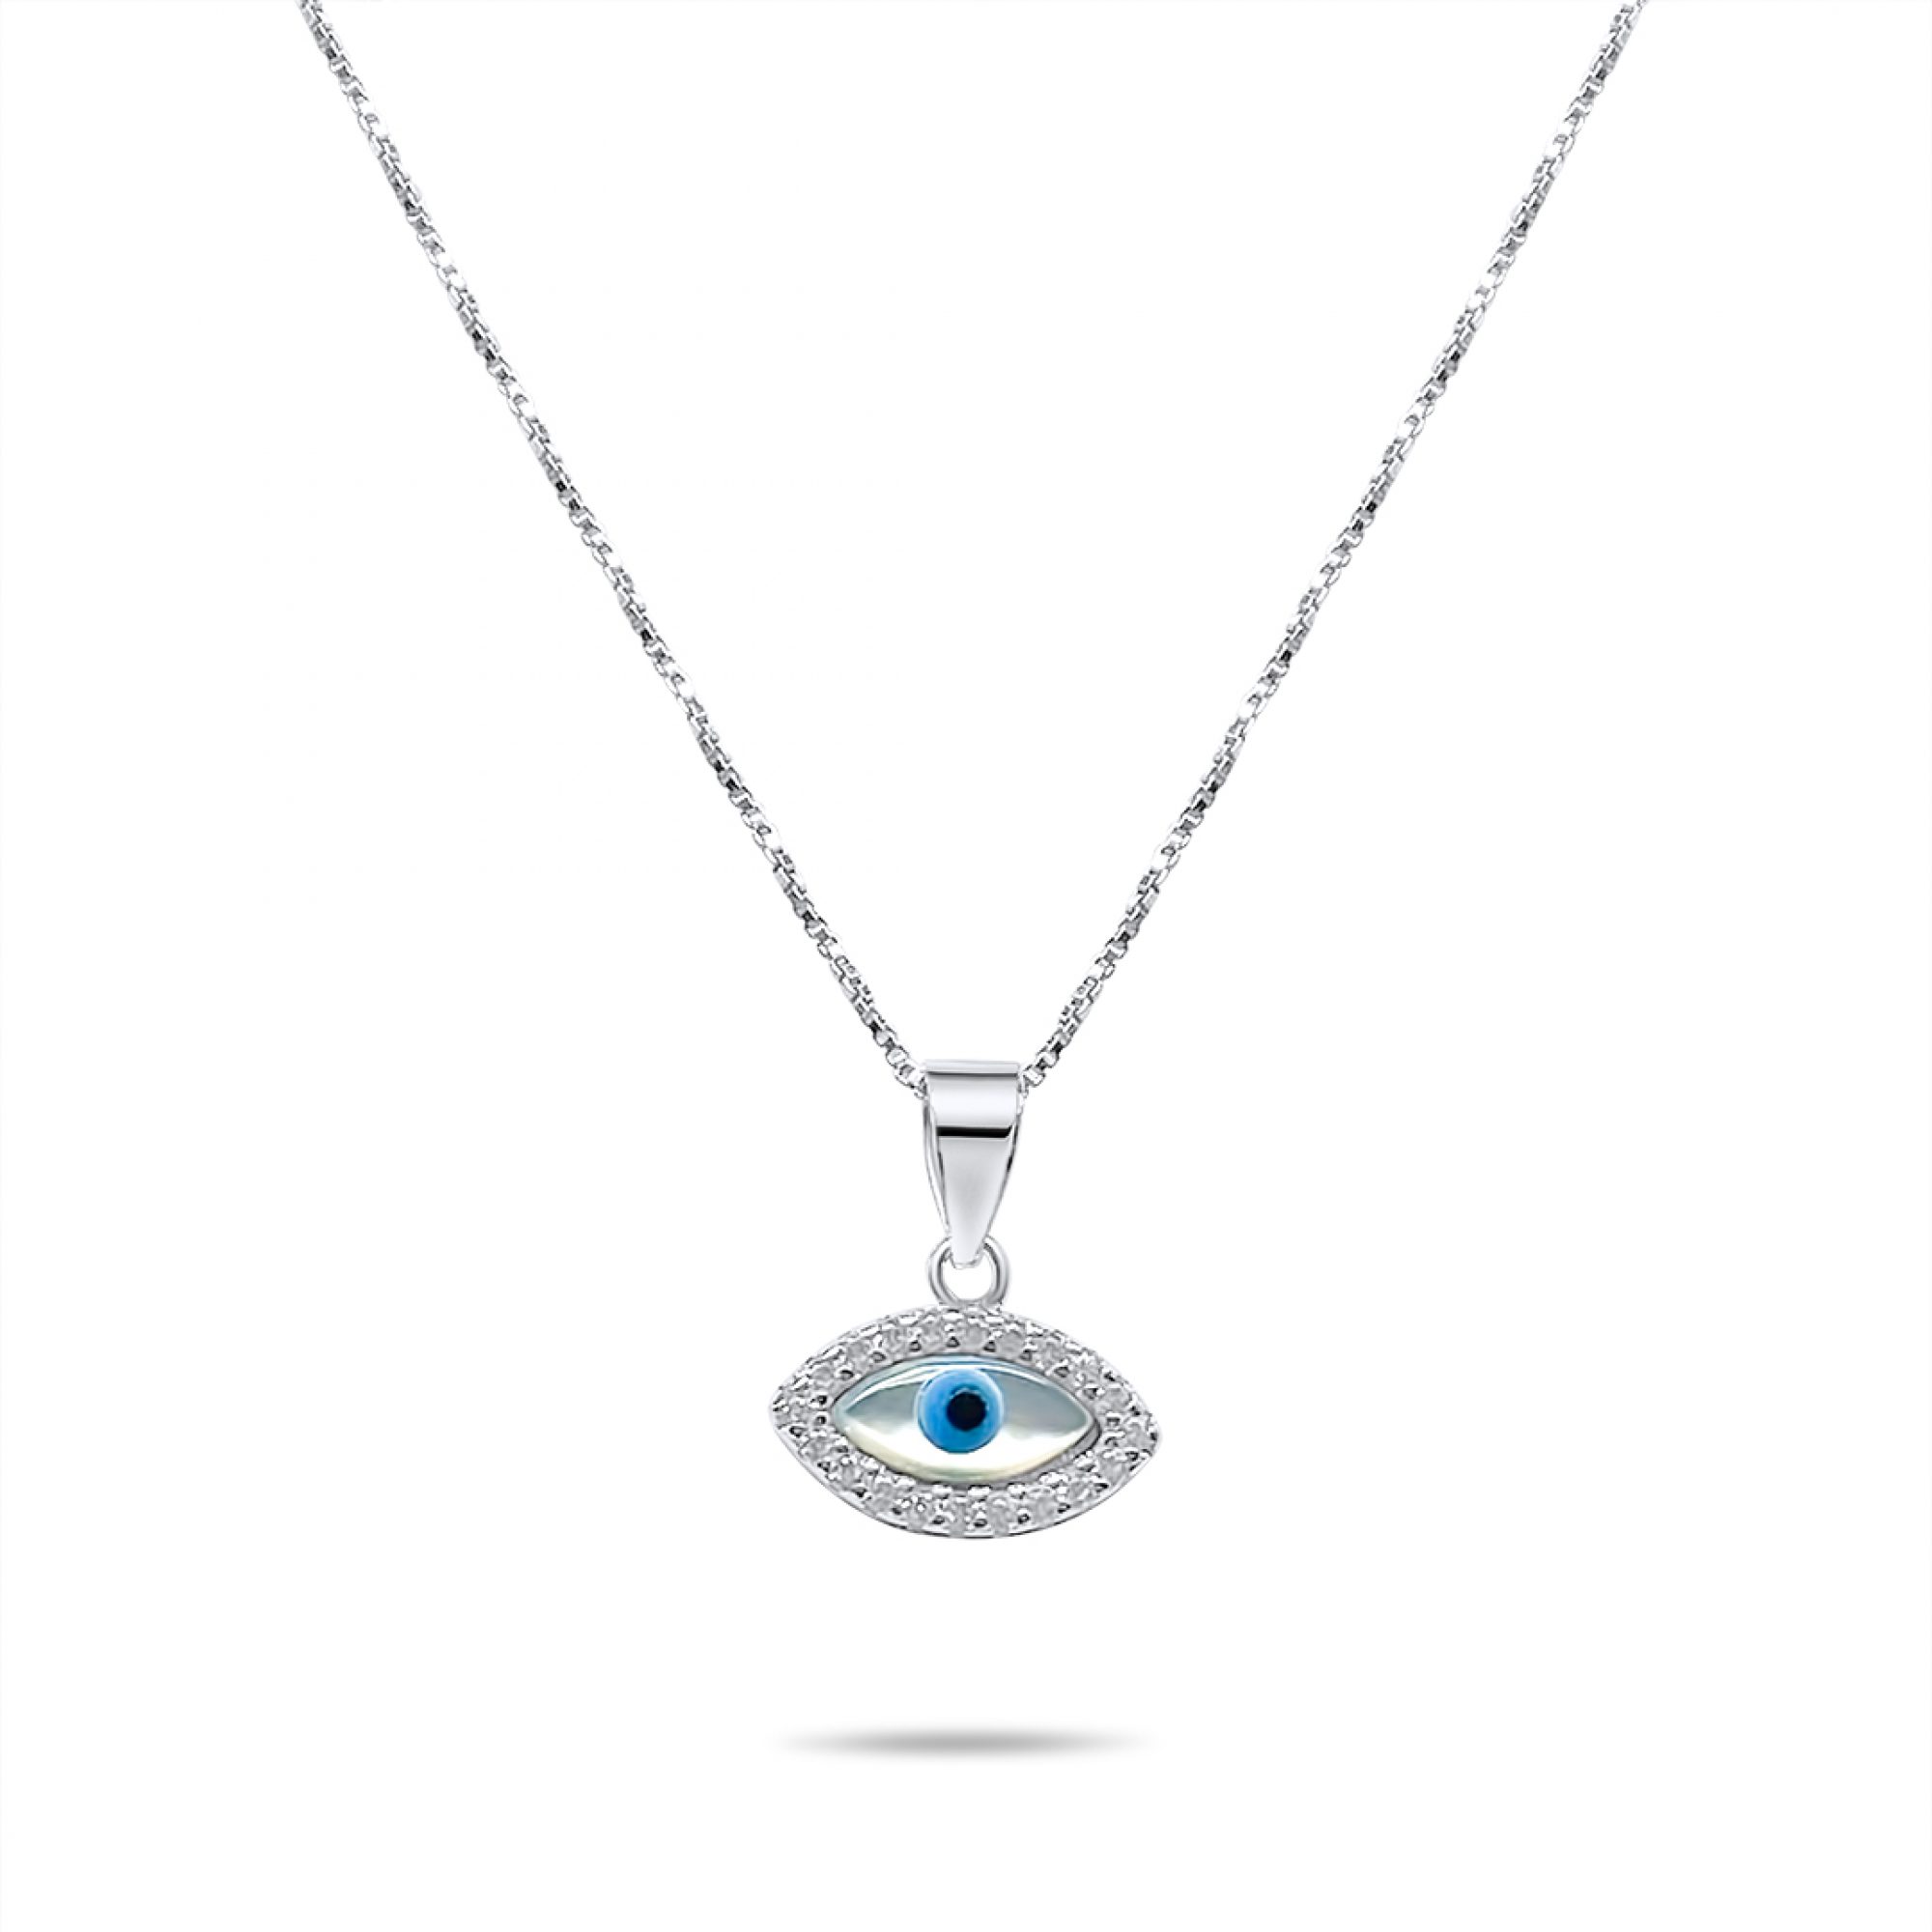 Eye pendant necklace with mother of pearl and zircon stones